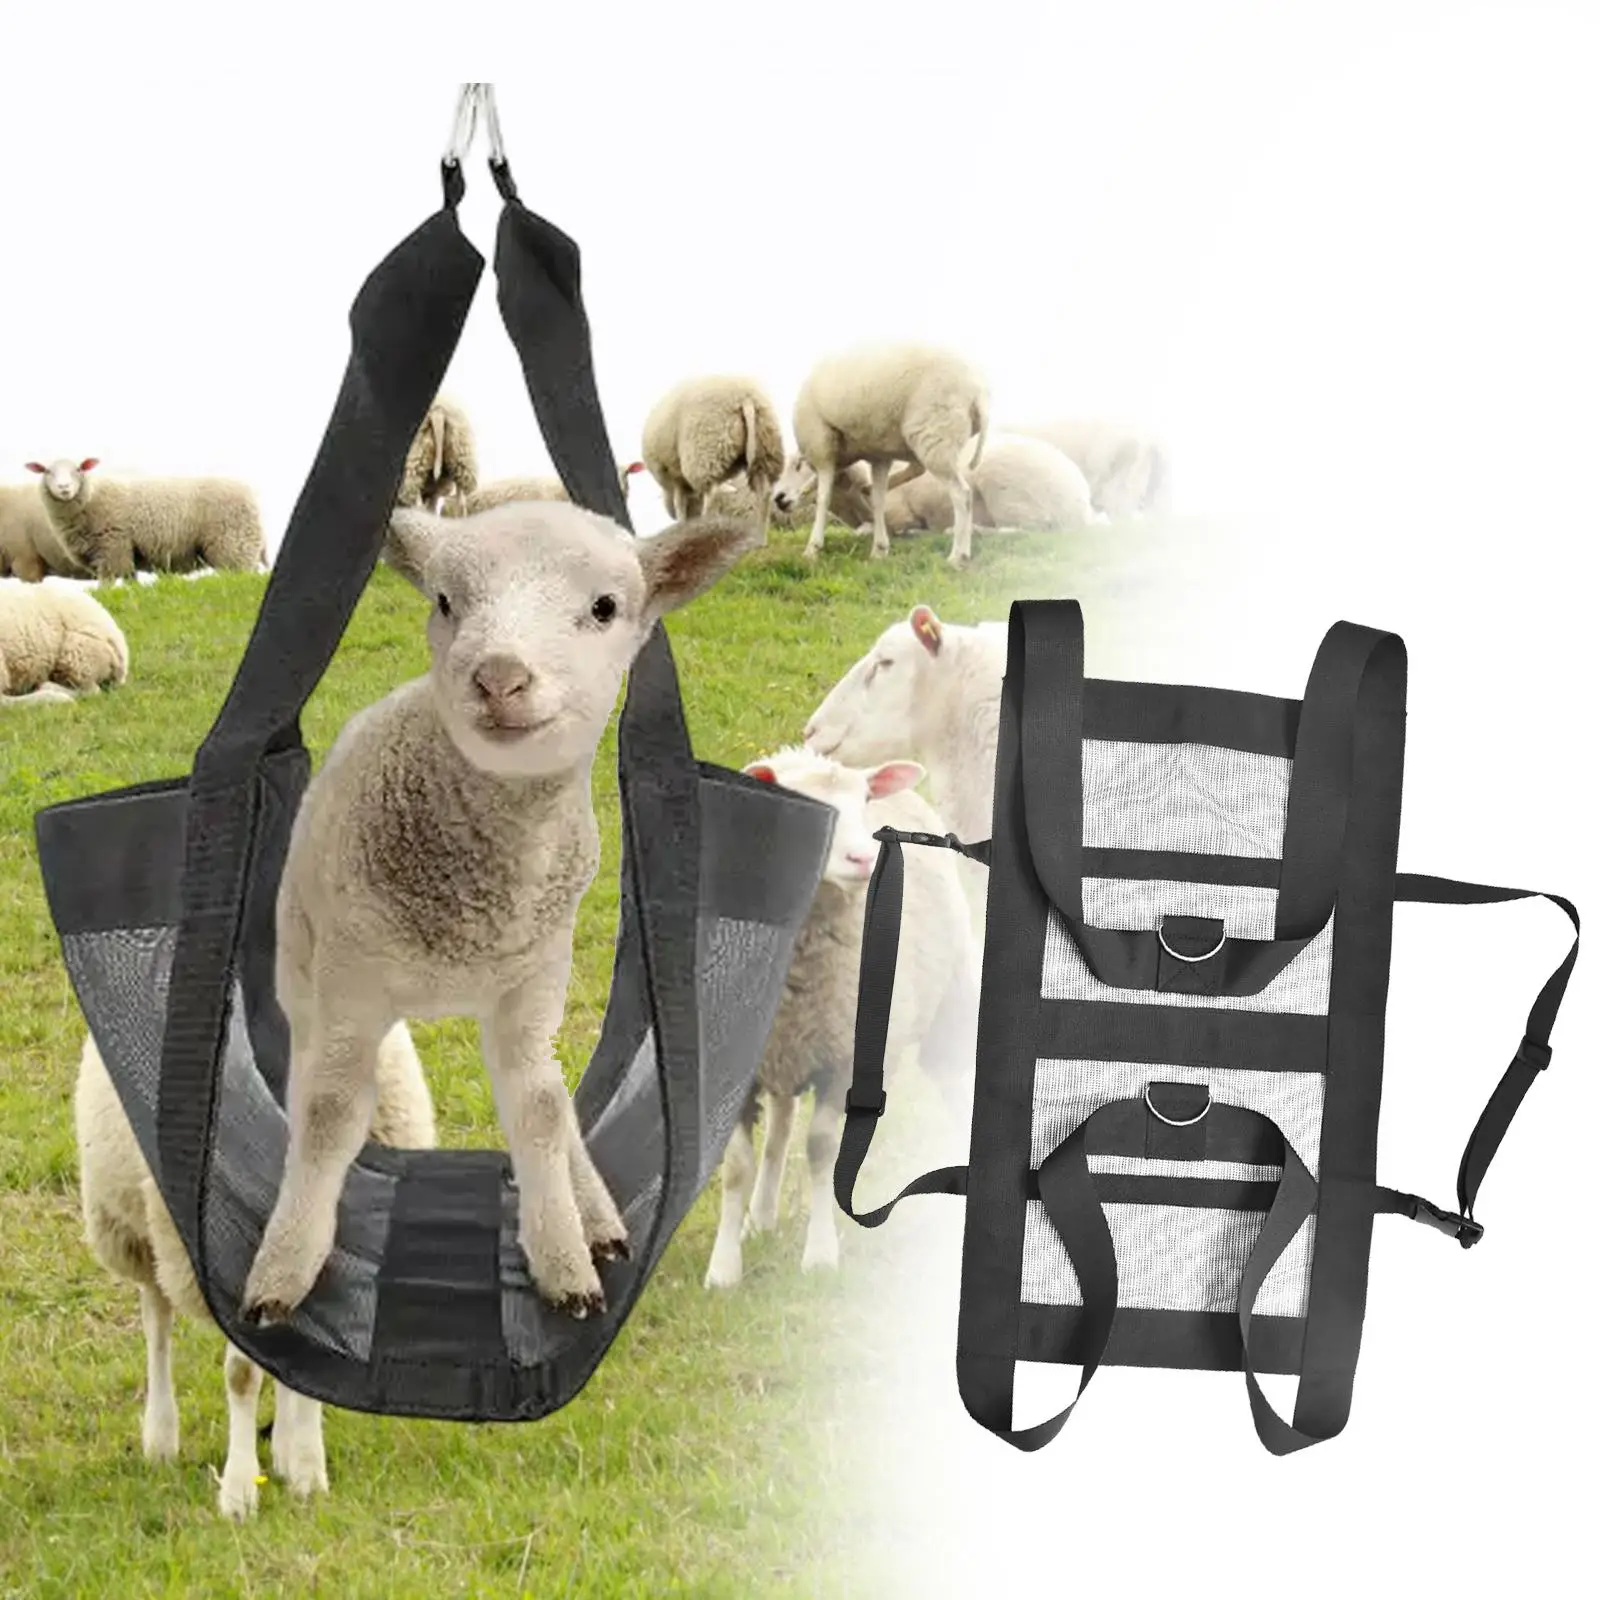 Calf Sling for Weighing Small Animals Hang Scale Sling for Goats Dogs Keeps Animals in The Correct Position to Weigh Hogs Sheep